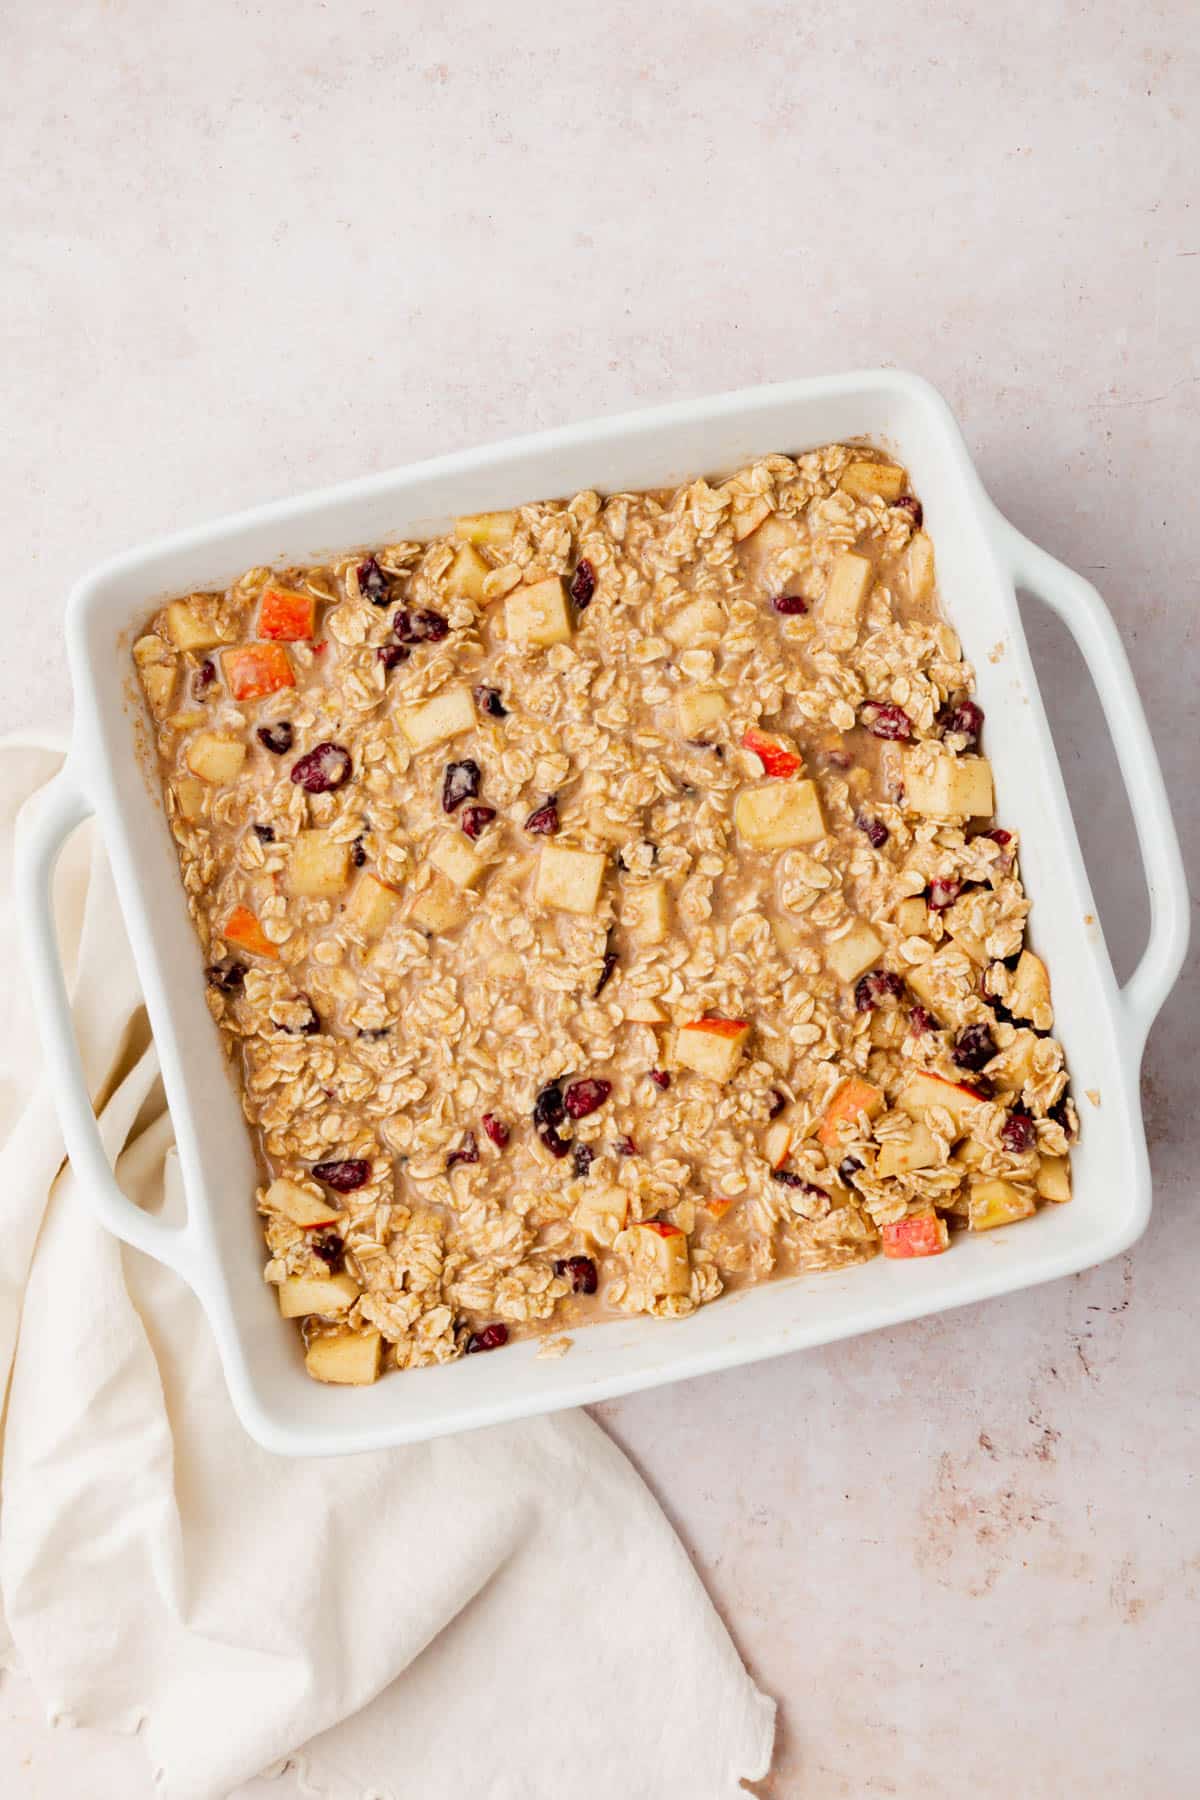 An oatmeal, apple and dried cranberry mixture in a square baking dish before baking in the oven.